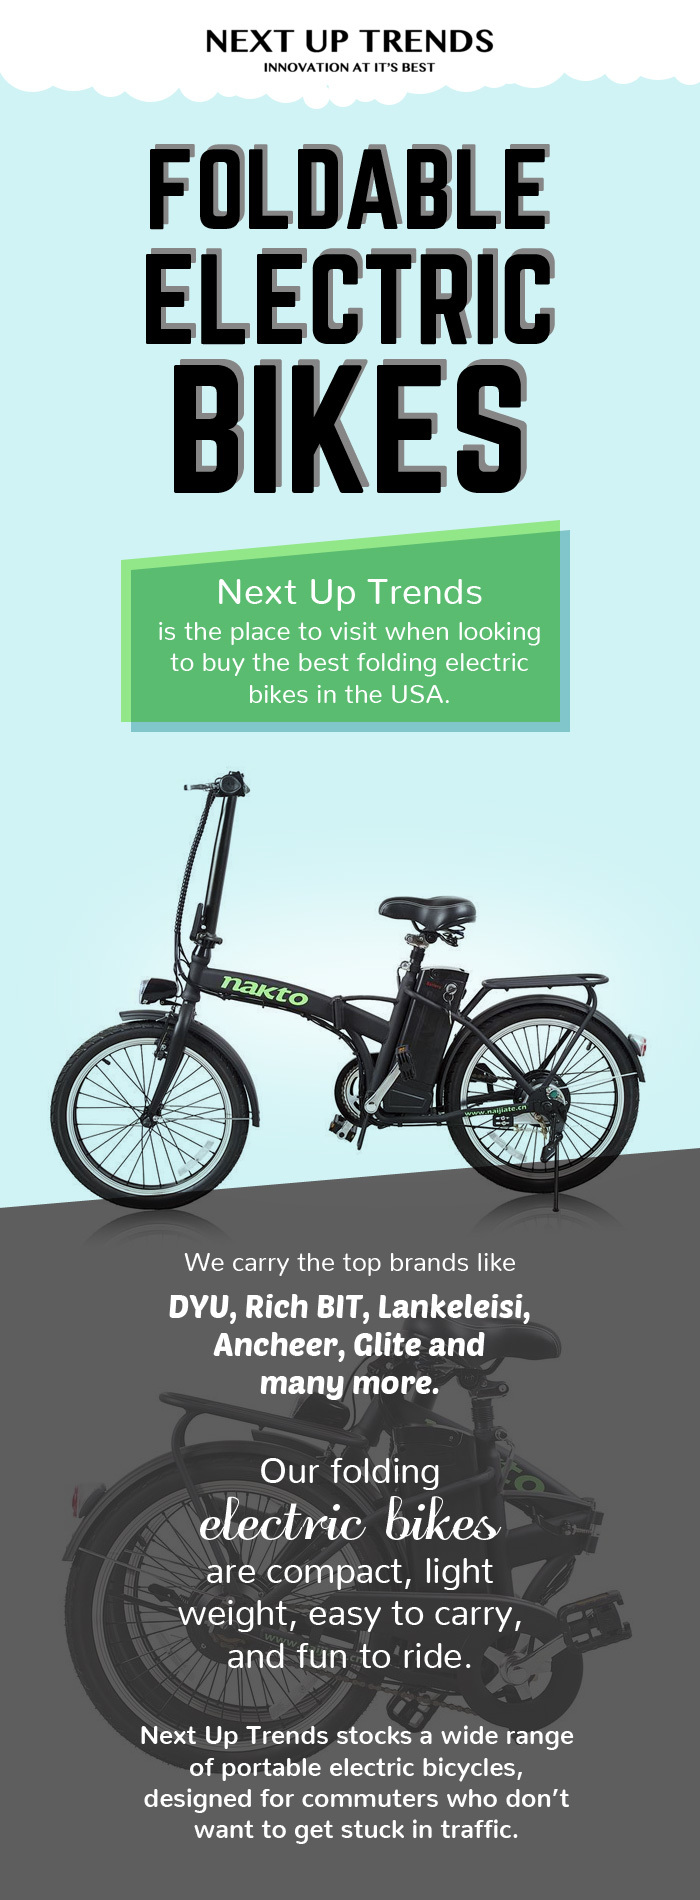 Travel in Style with Foldable Electric Bikes from Next Up Trends